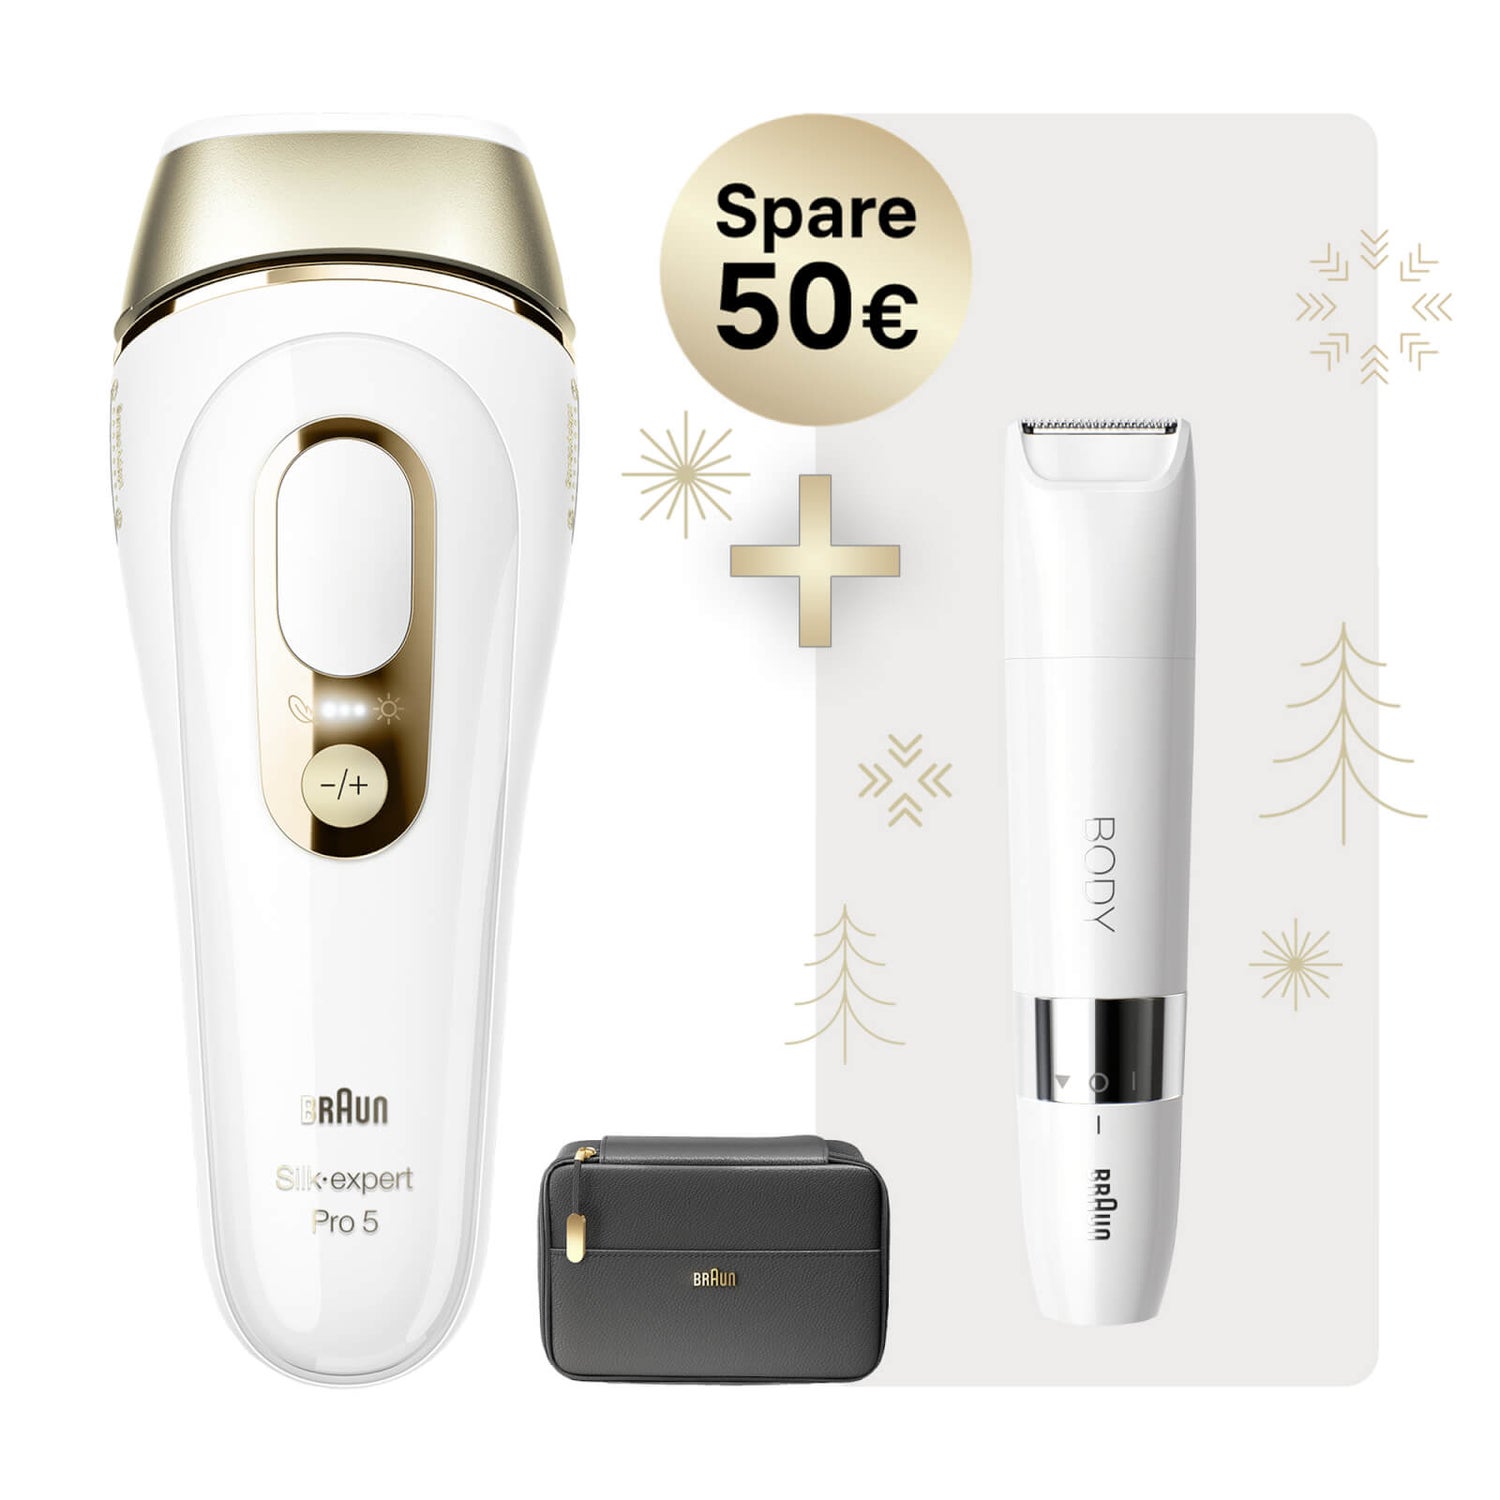 Braun Silk-expert Pro 5 PL5140 IPL Exclusive Christmas gift offer with Braun Body Mini Trimmer BS1000